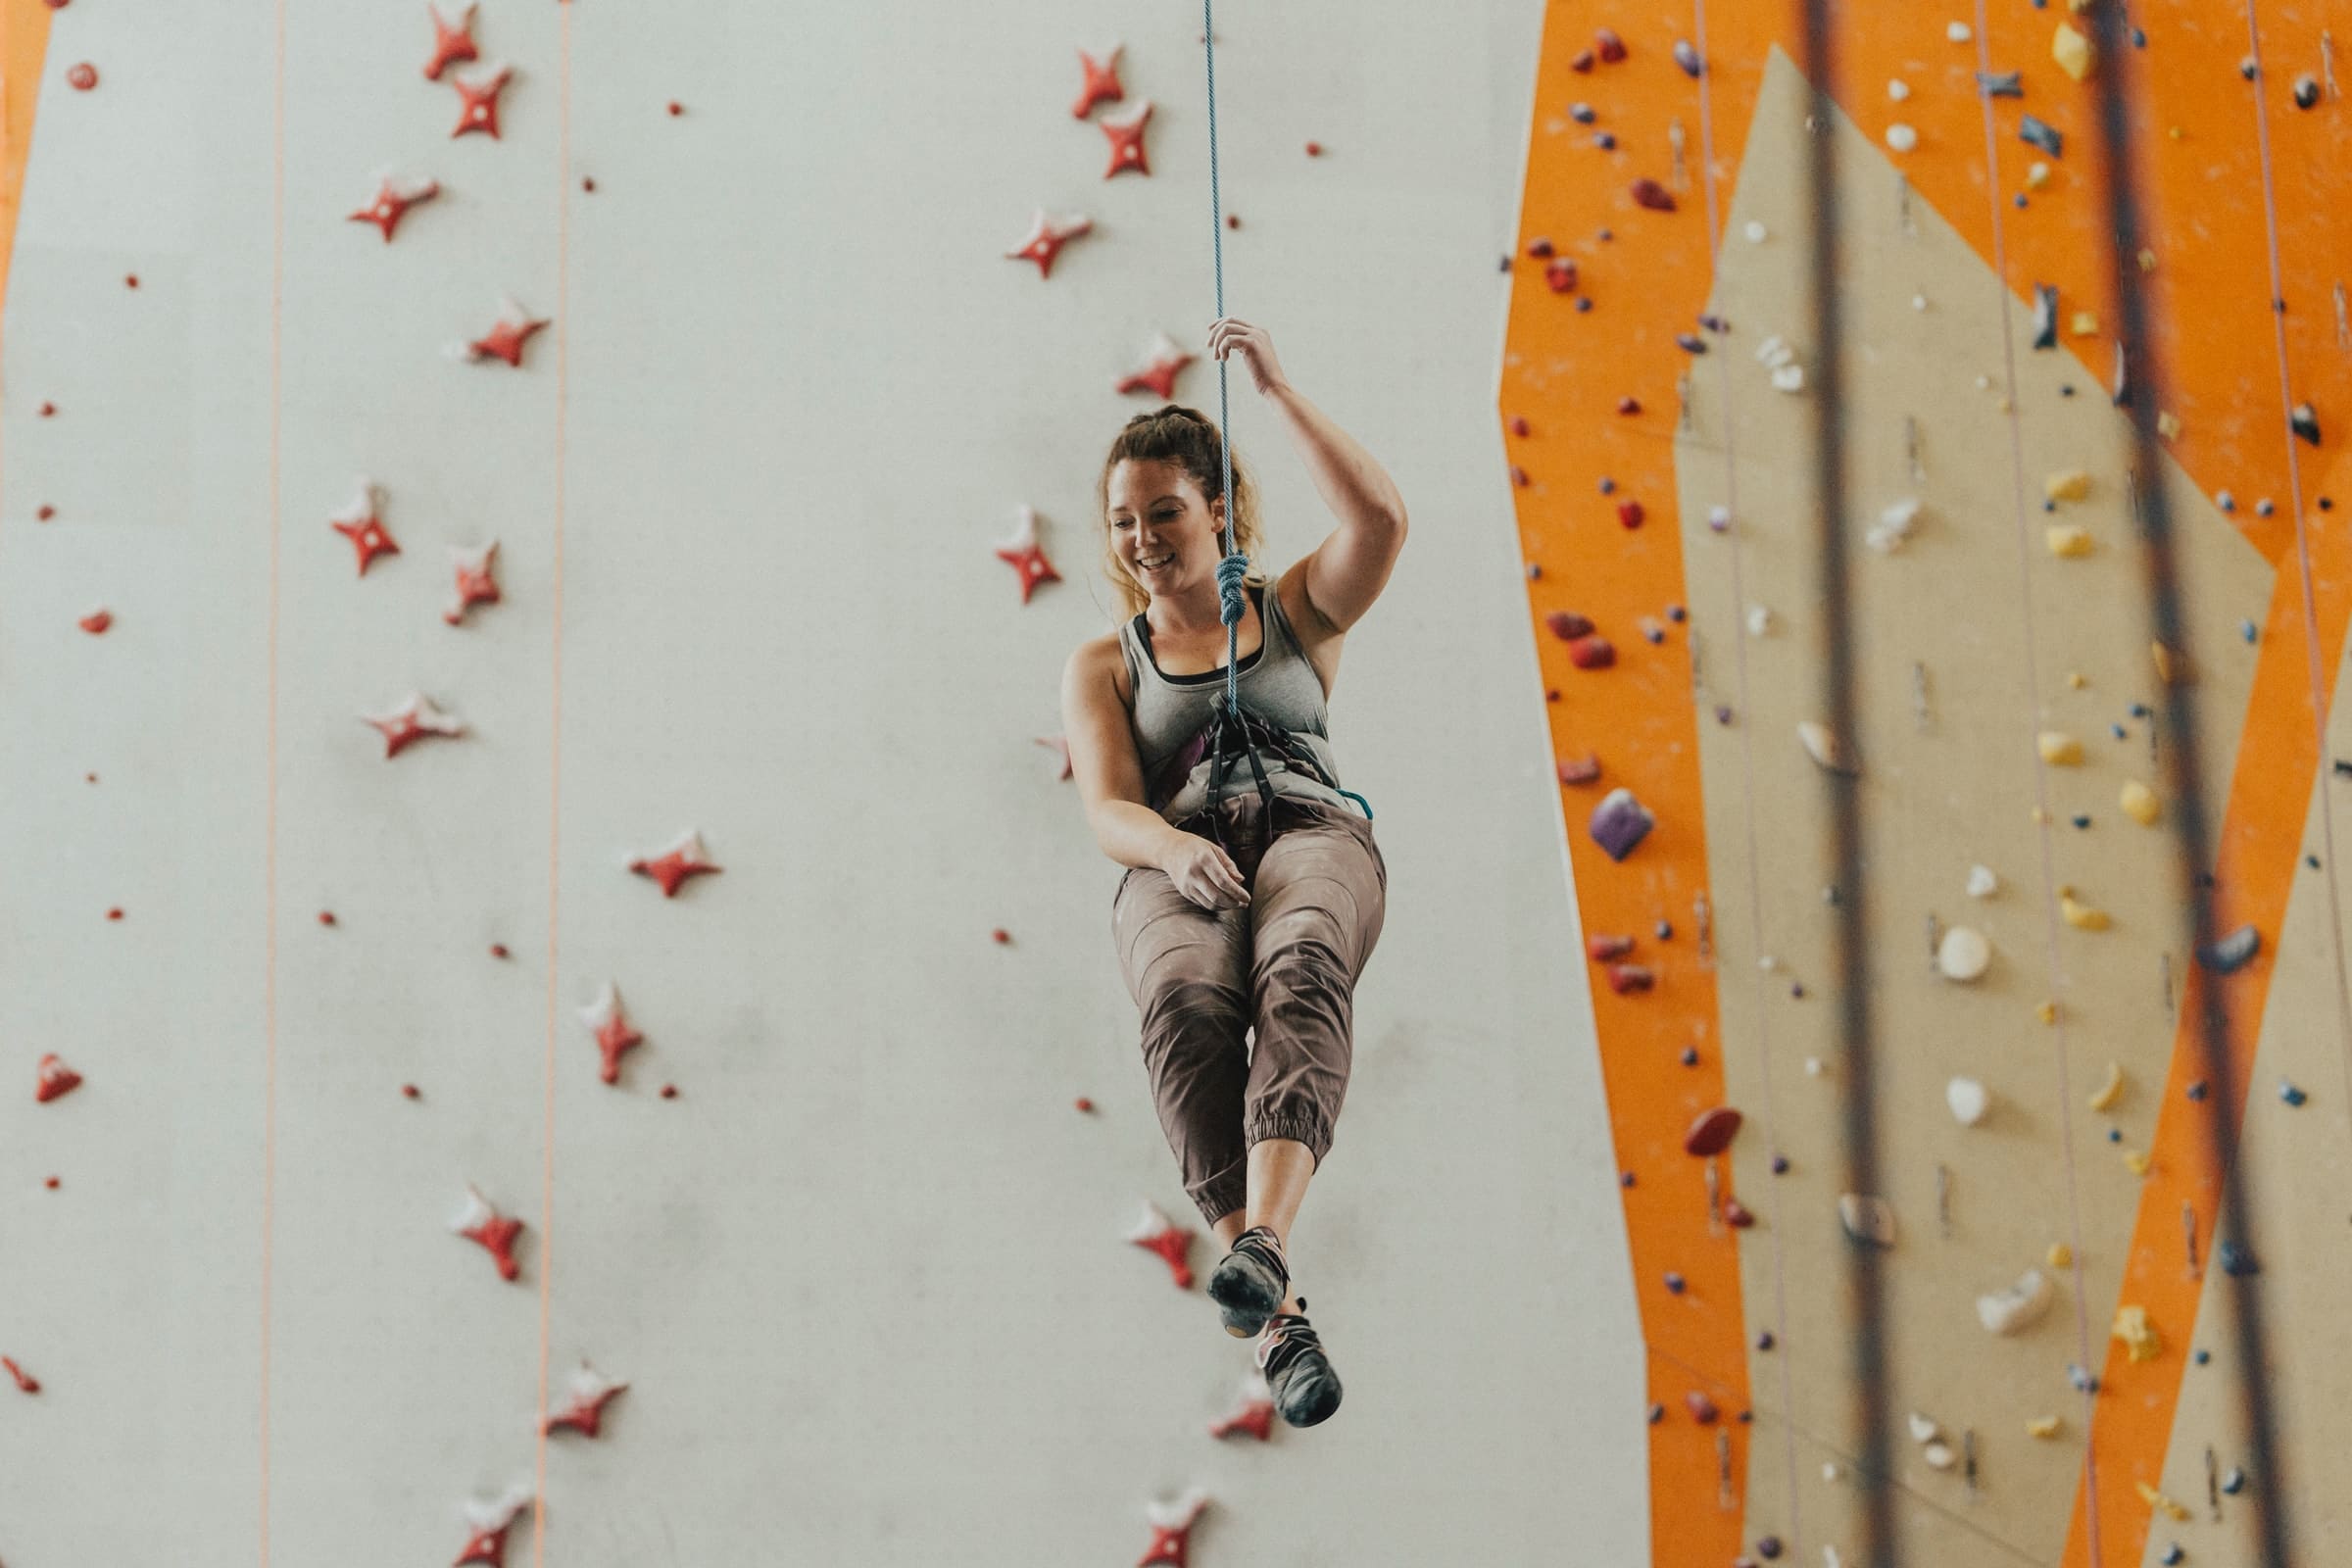 Smiling woman descending from a climbing wall